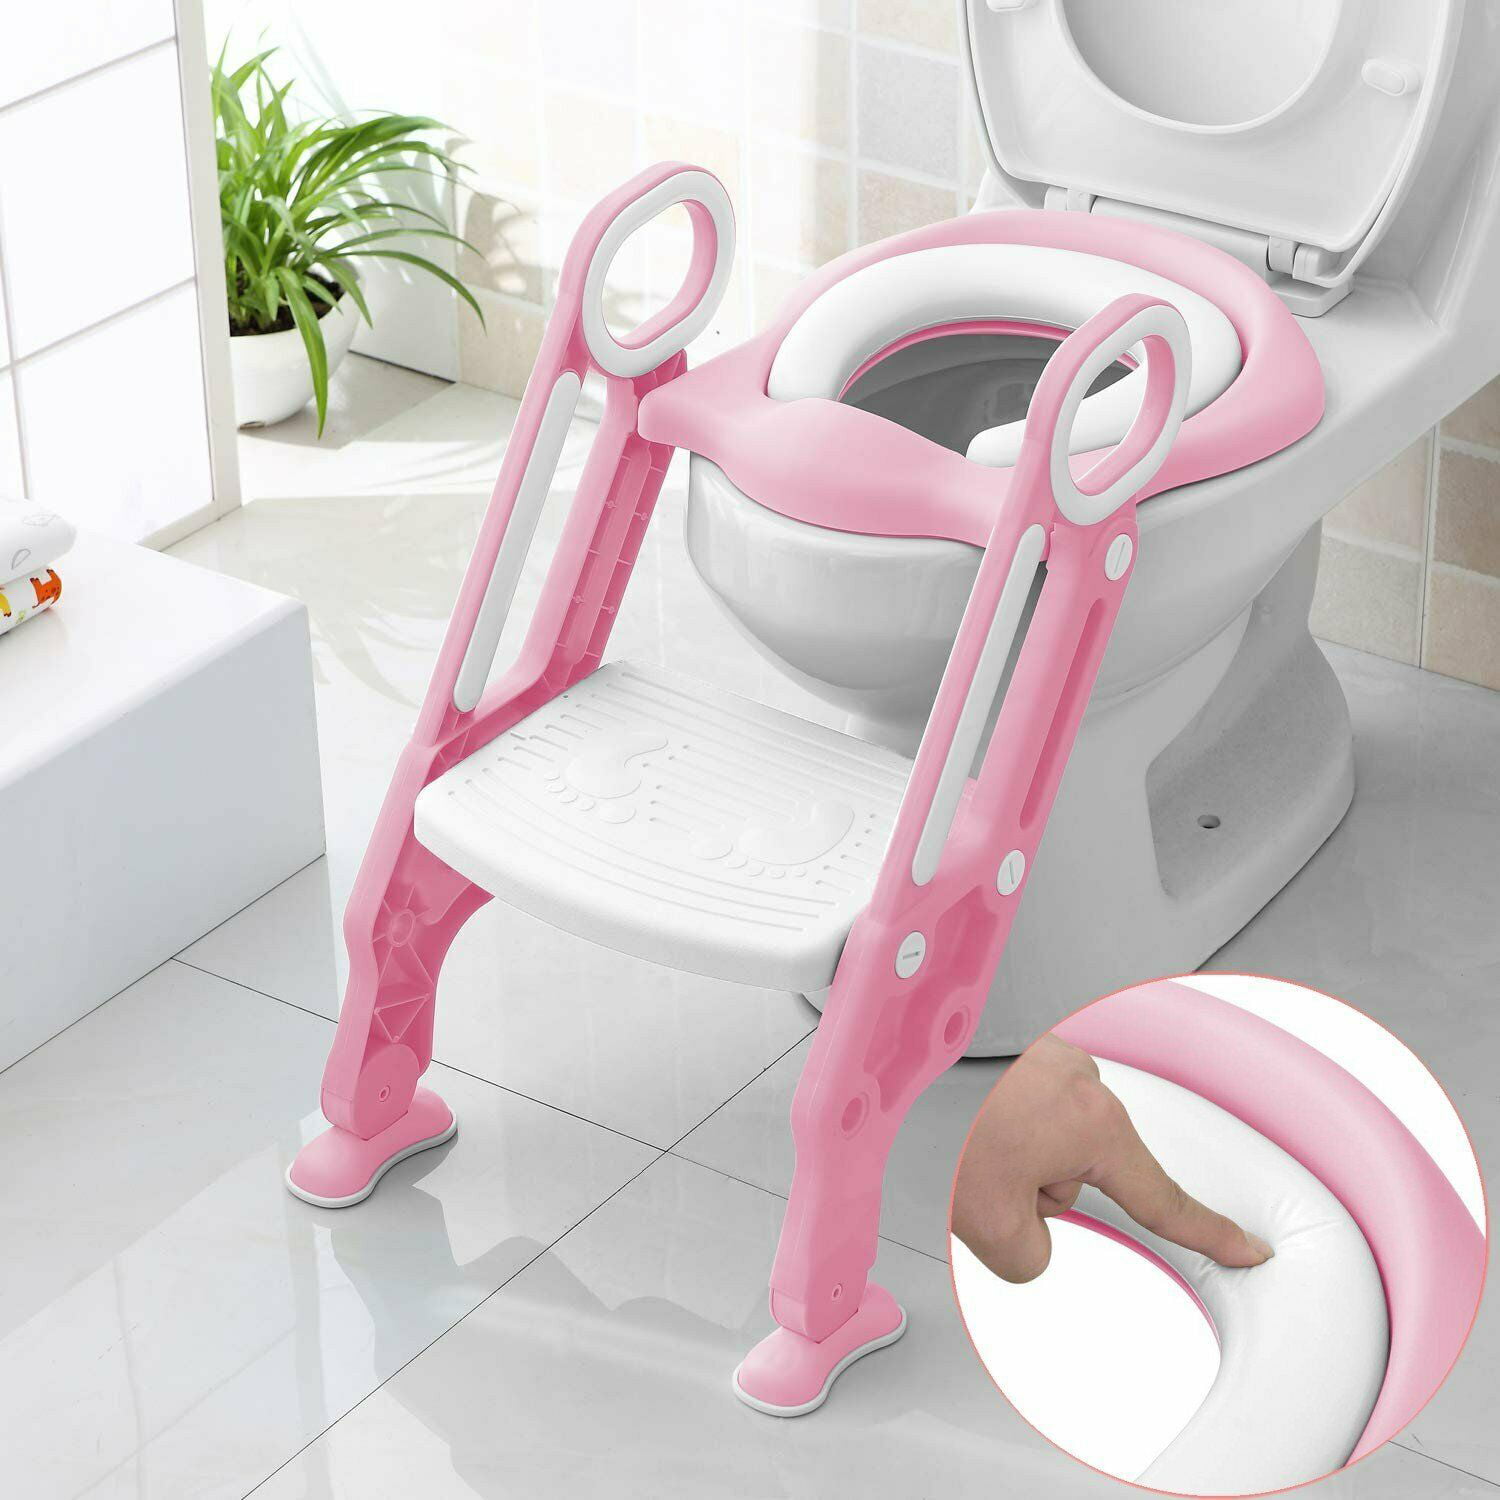 Disney Pooh Soft Toilet Topper with Handles Baby Potty Training Seat  Blue Pink 